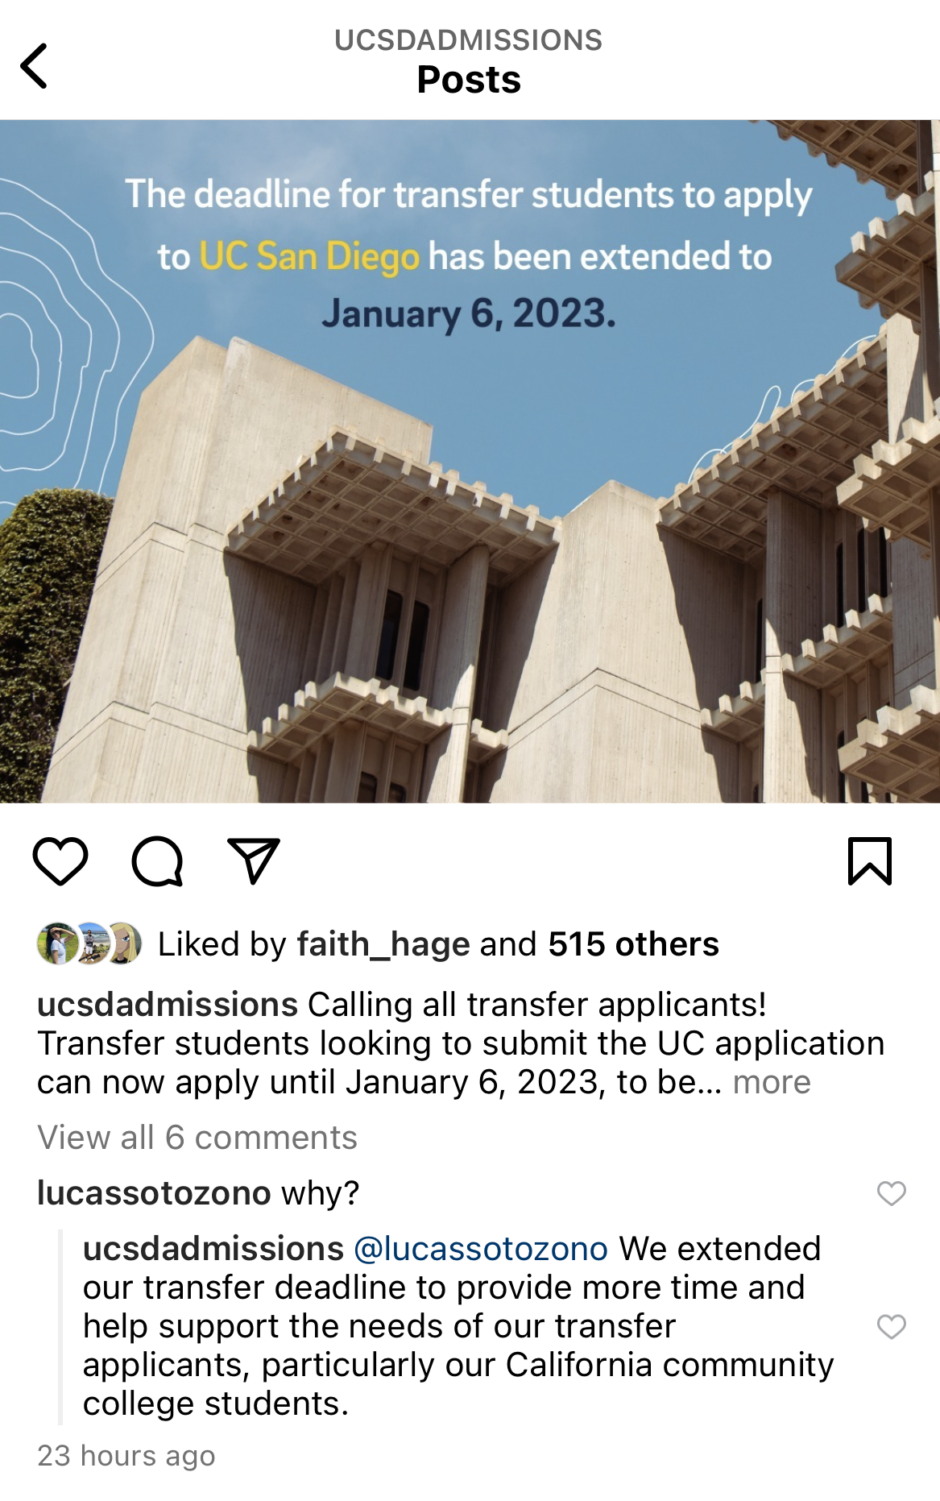 UCSD Instagram comment